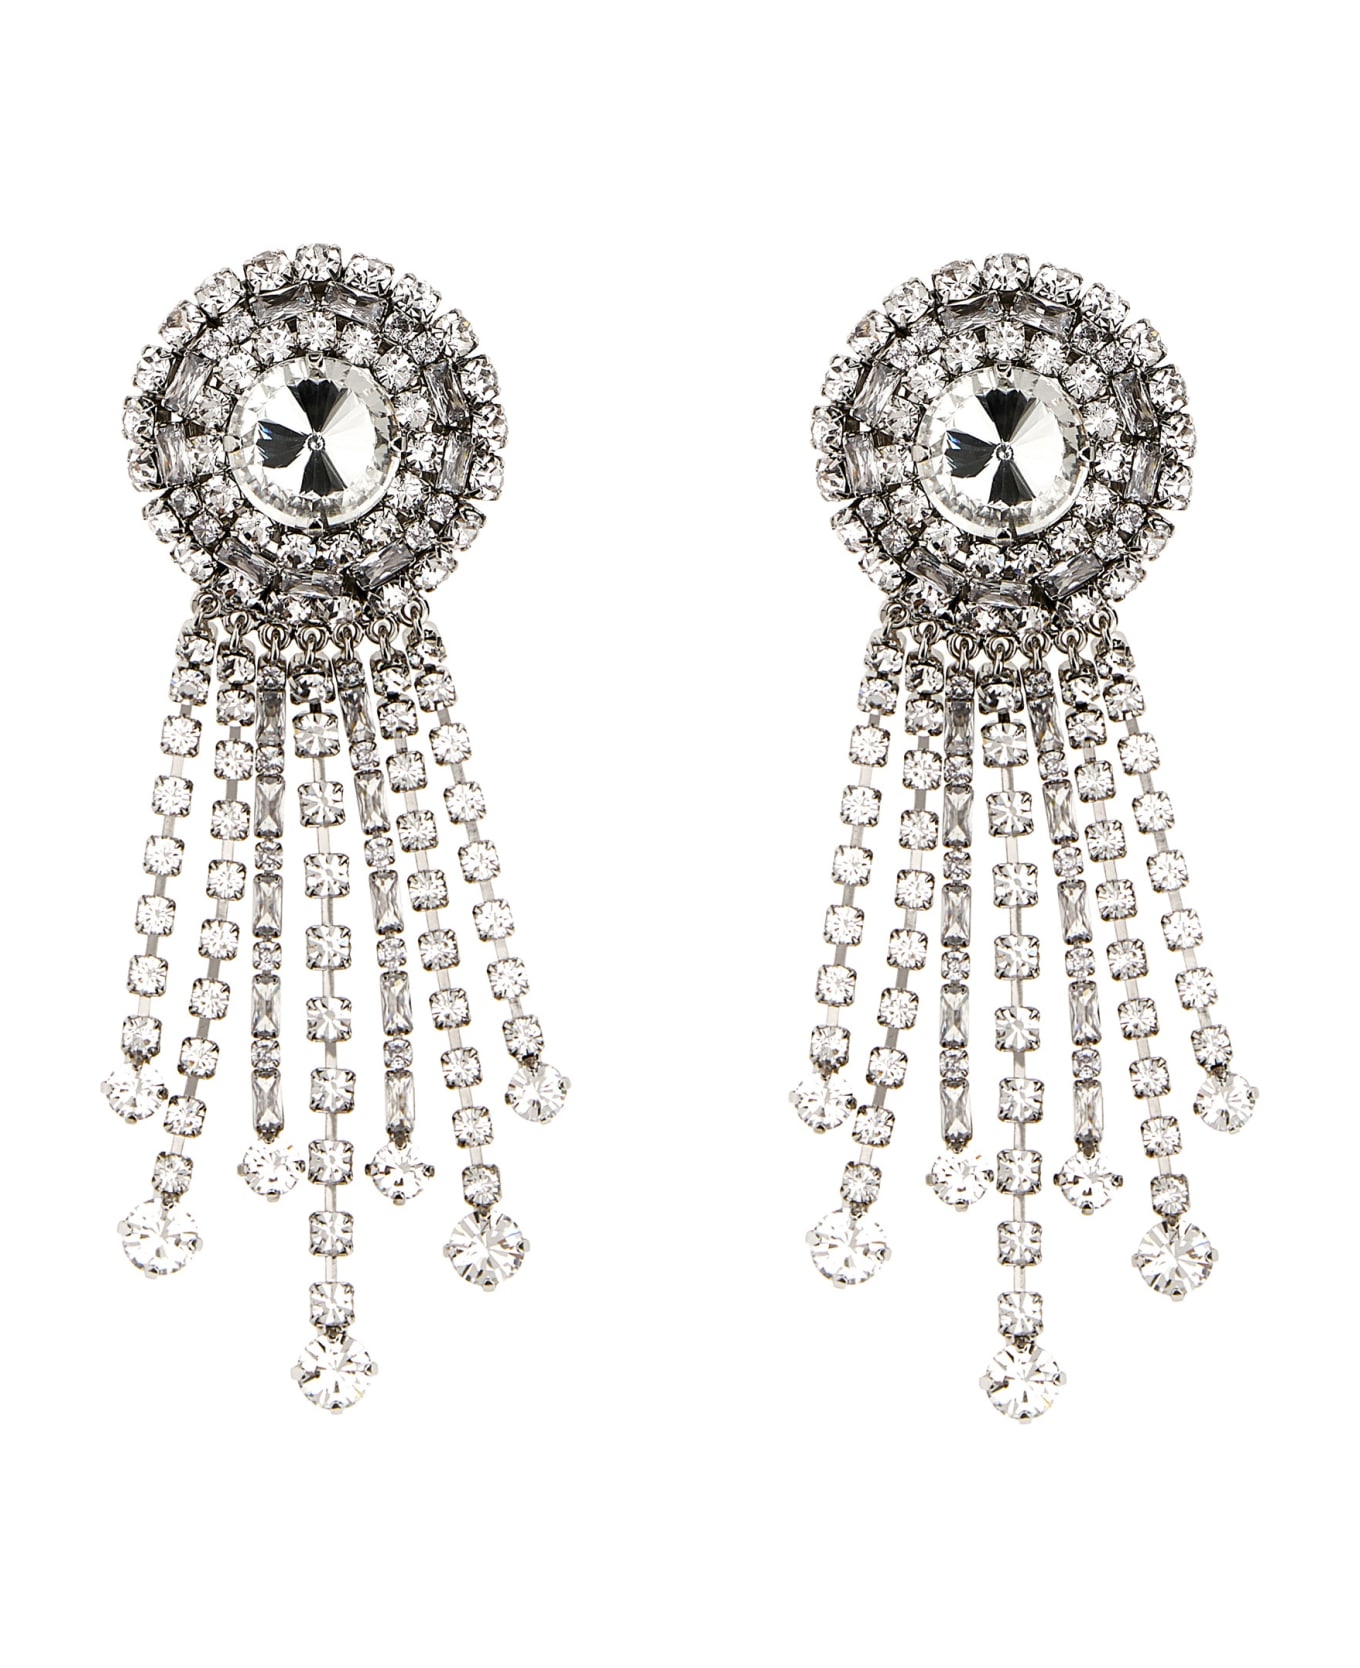 Alessandra Rich 'round' Earrings - Silver ジュエリー